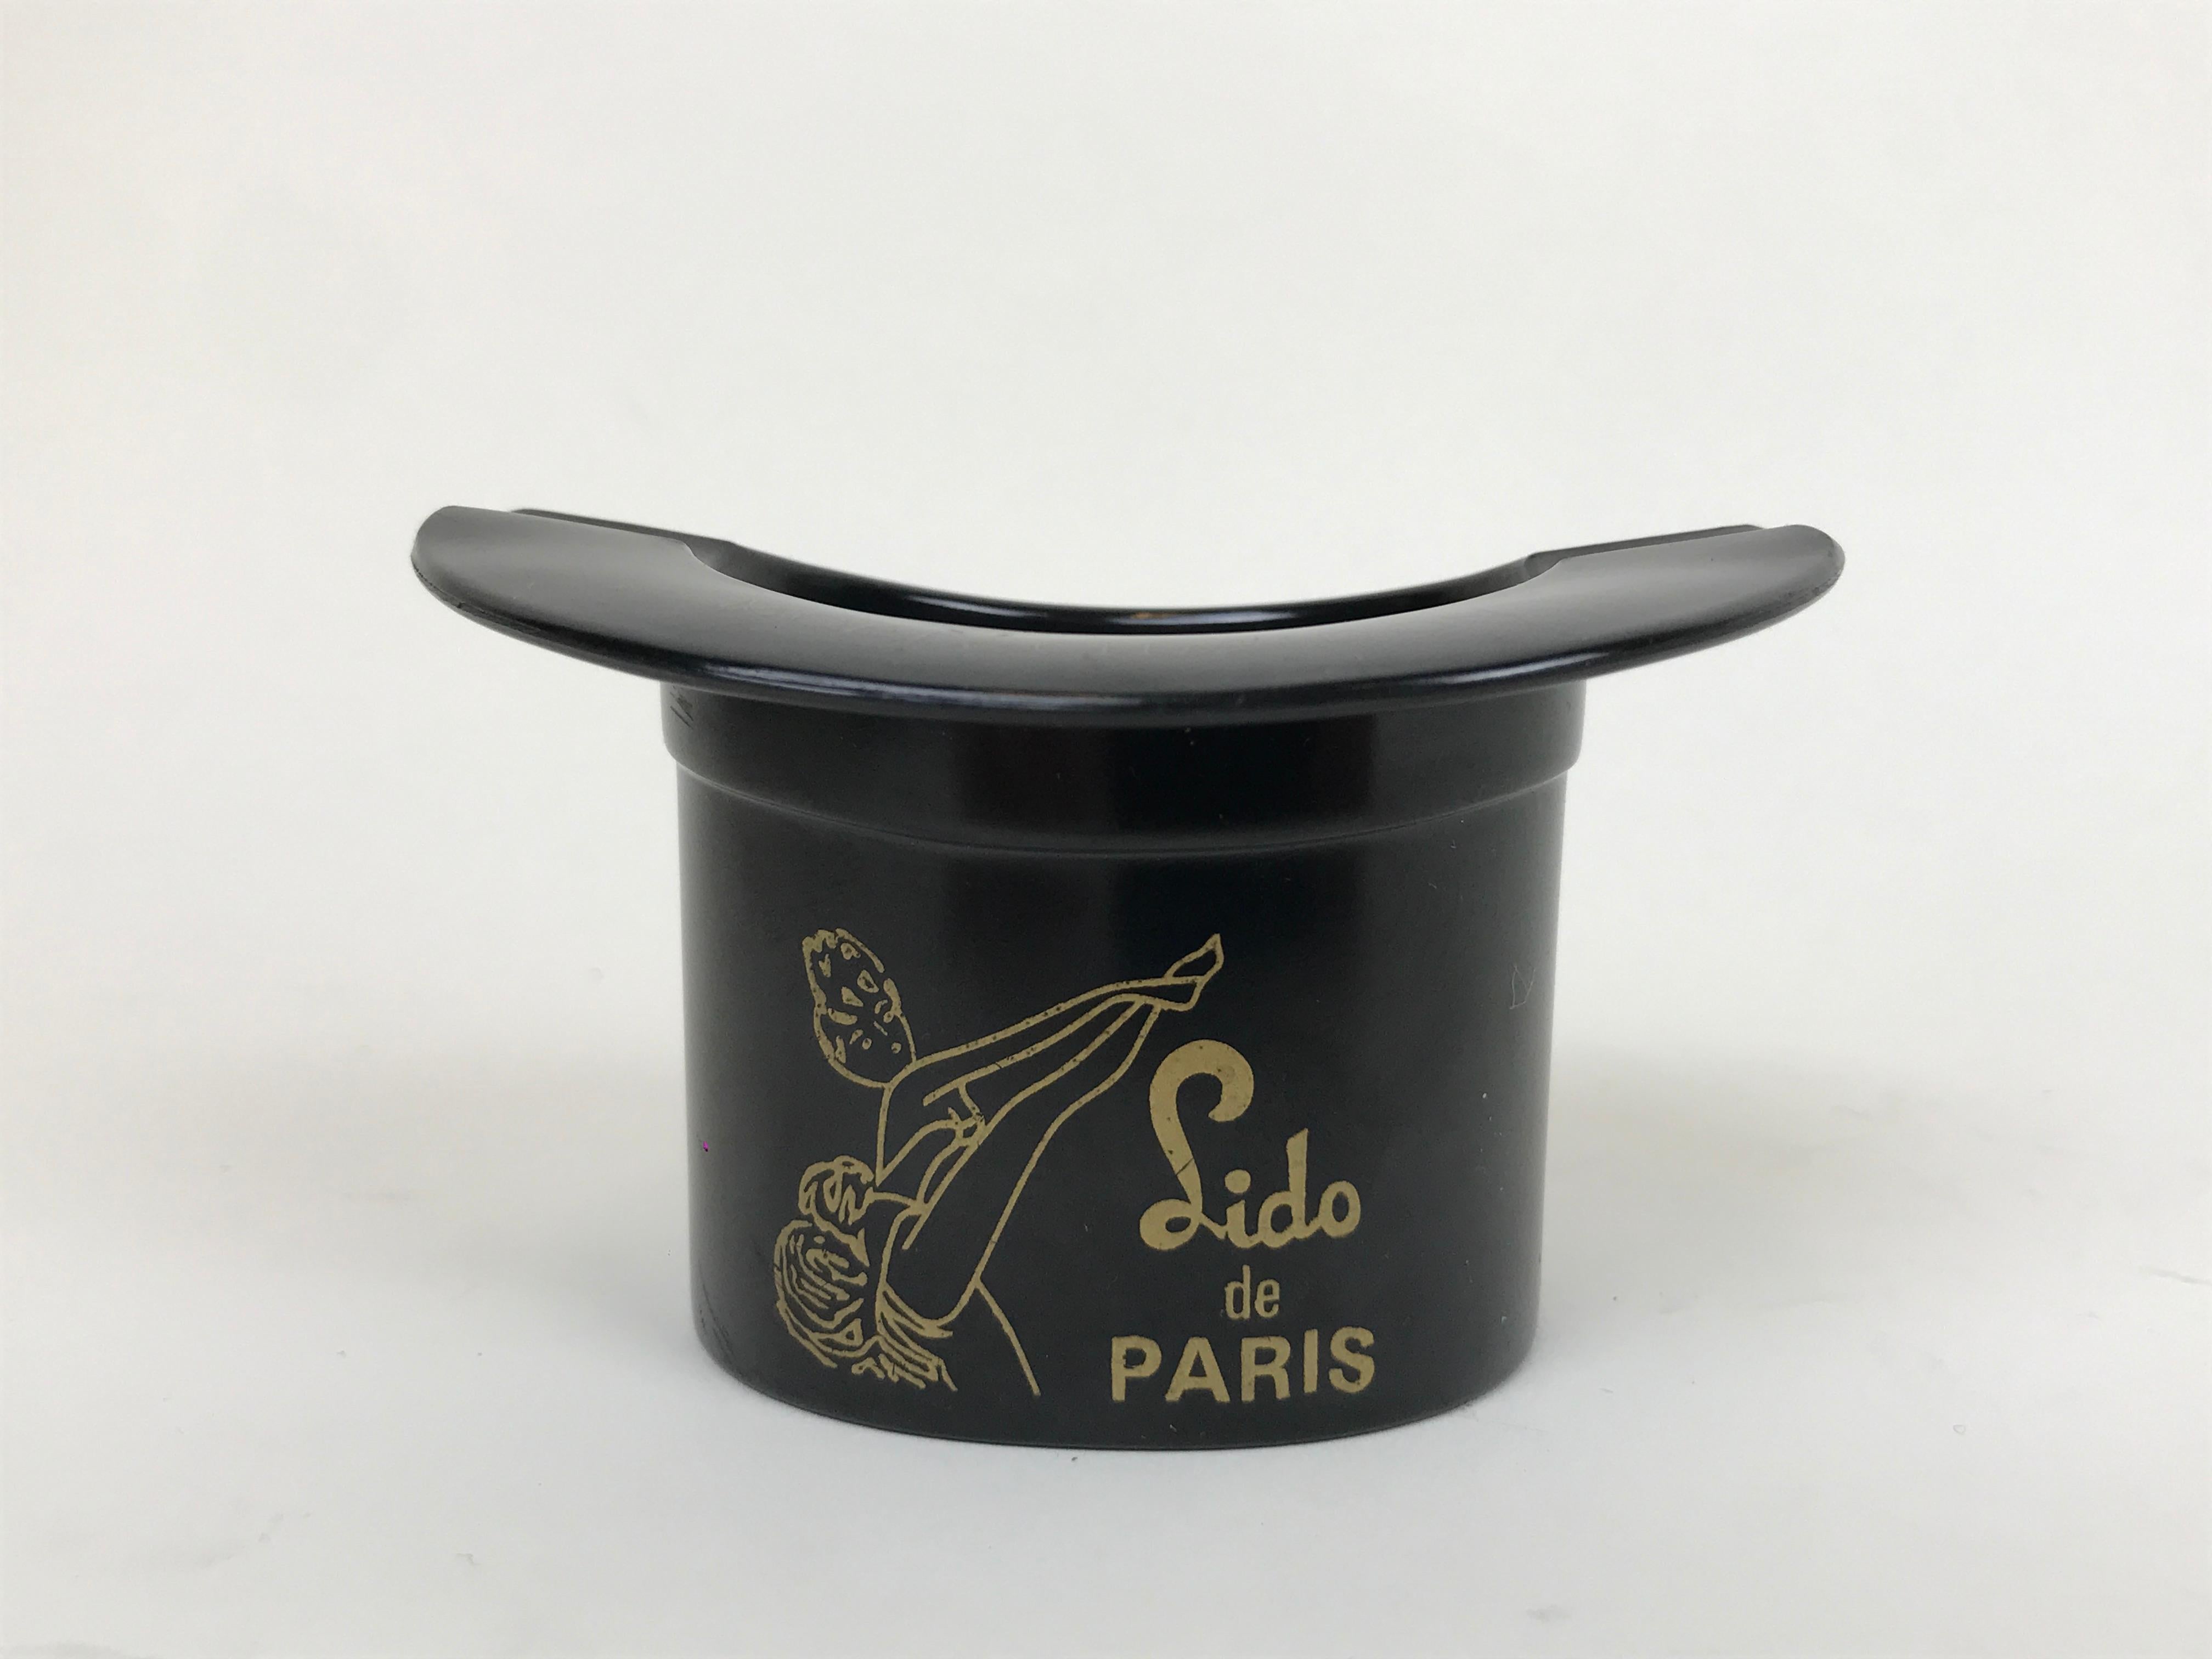 Mid-20th Century 1950s French Black Bakelite Tophat Lido Paris Moet & Chandon Advertising Ashtray For Sale